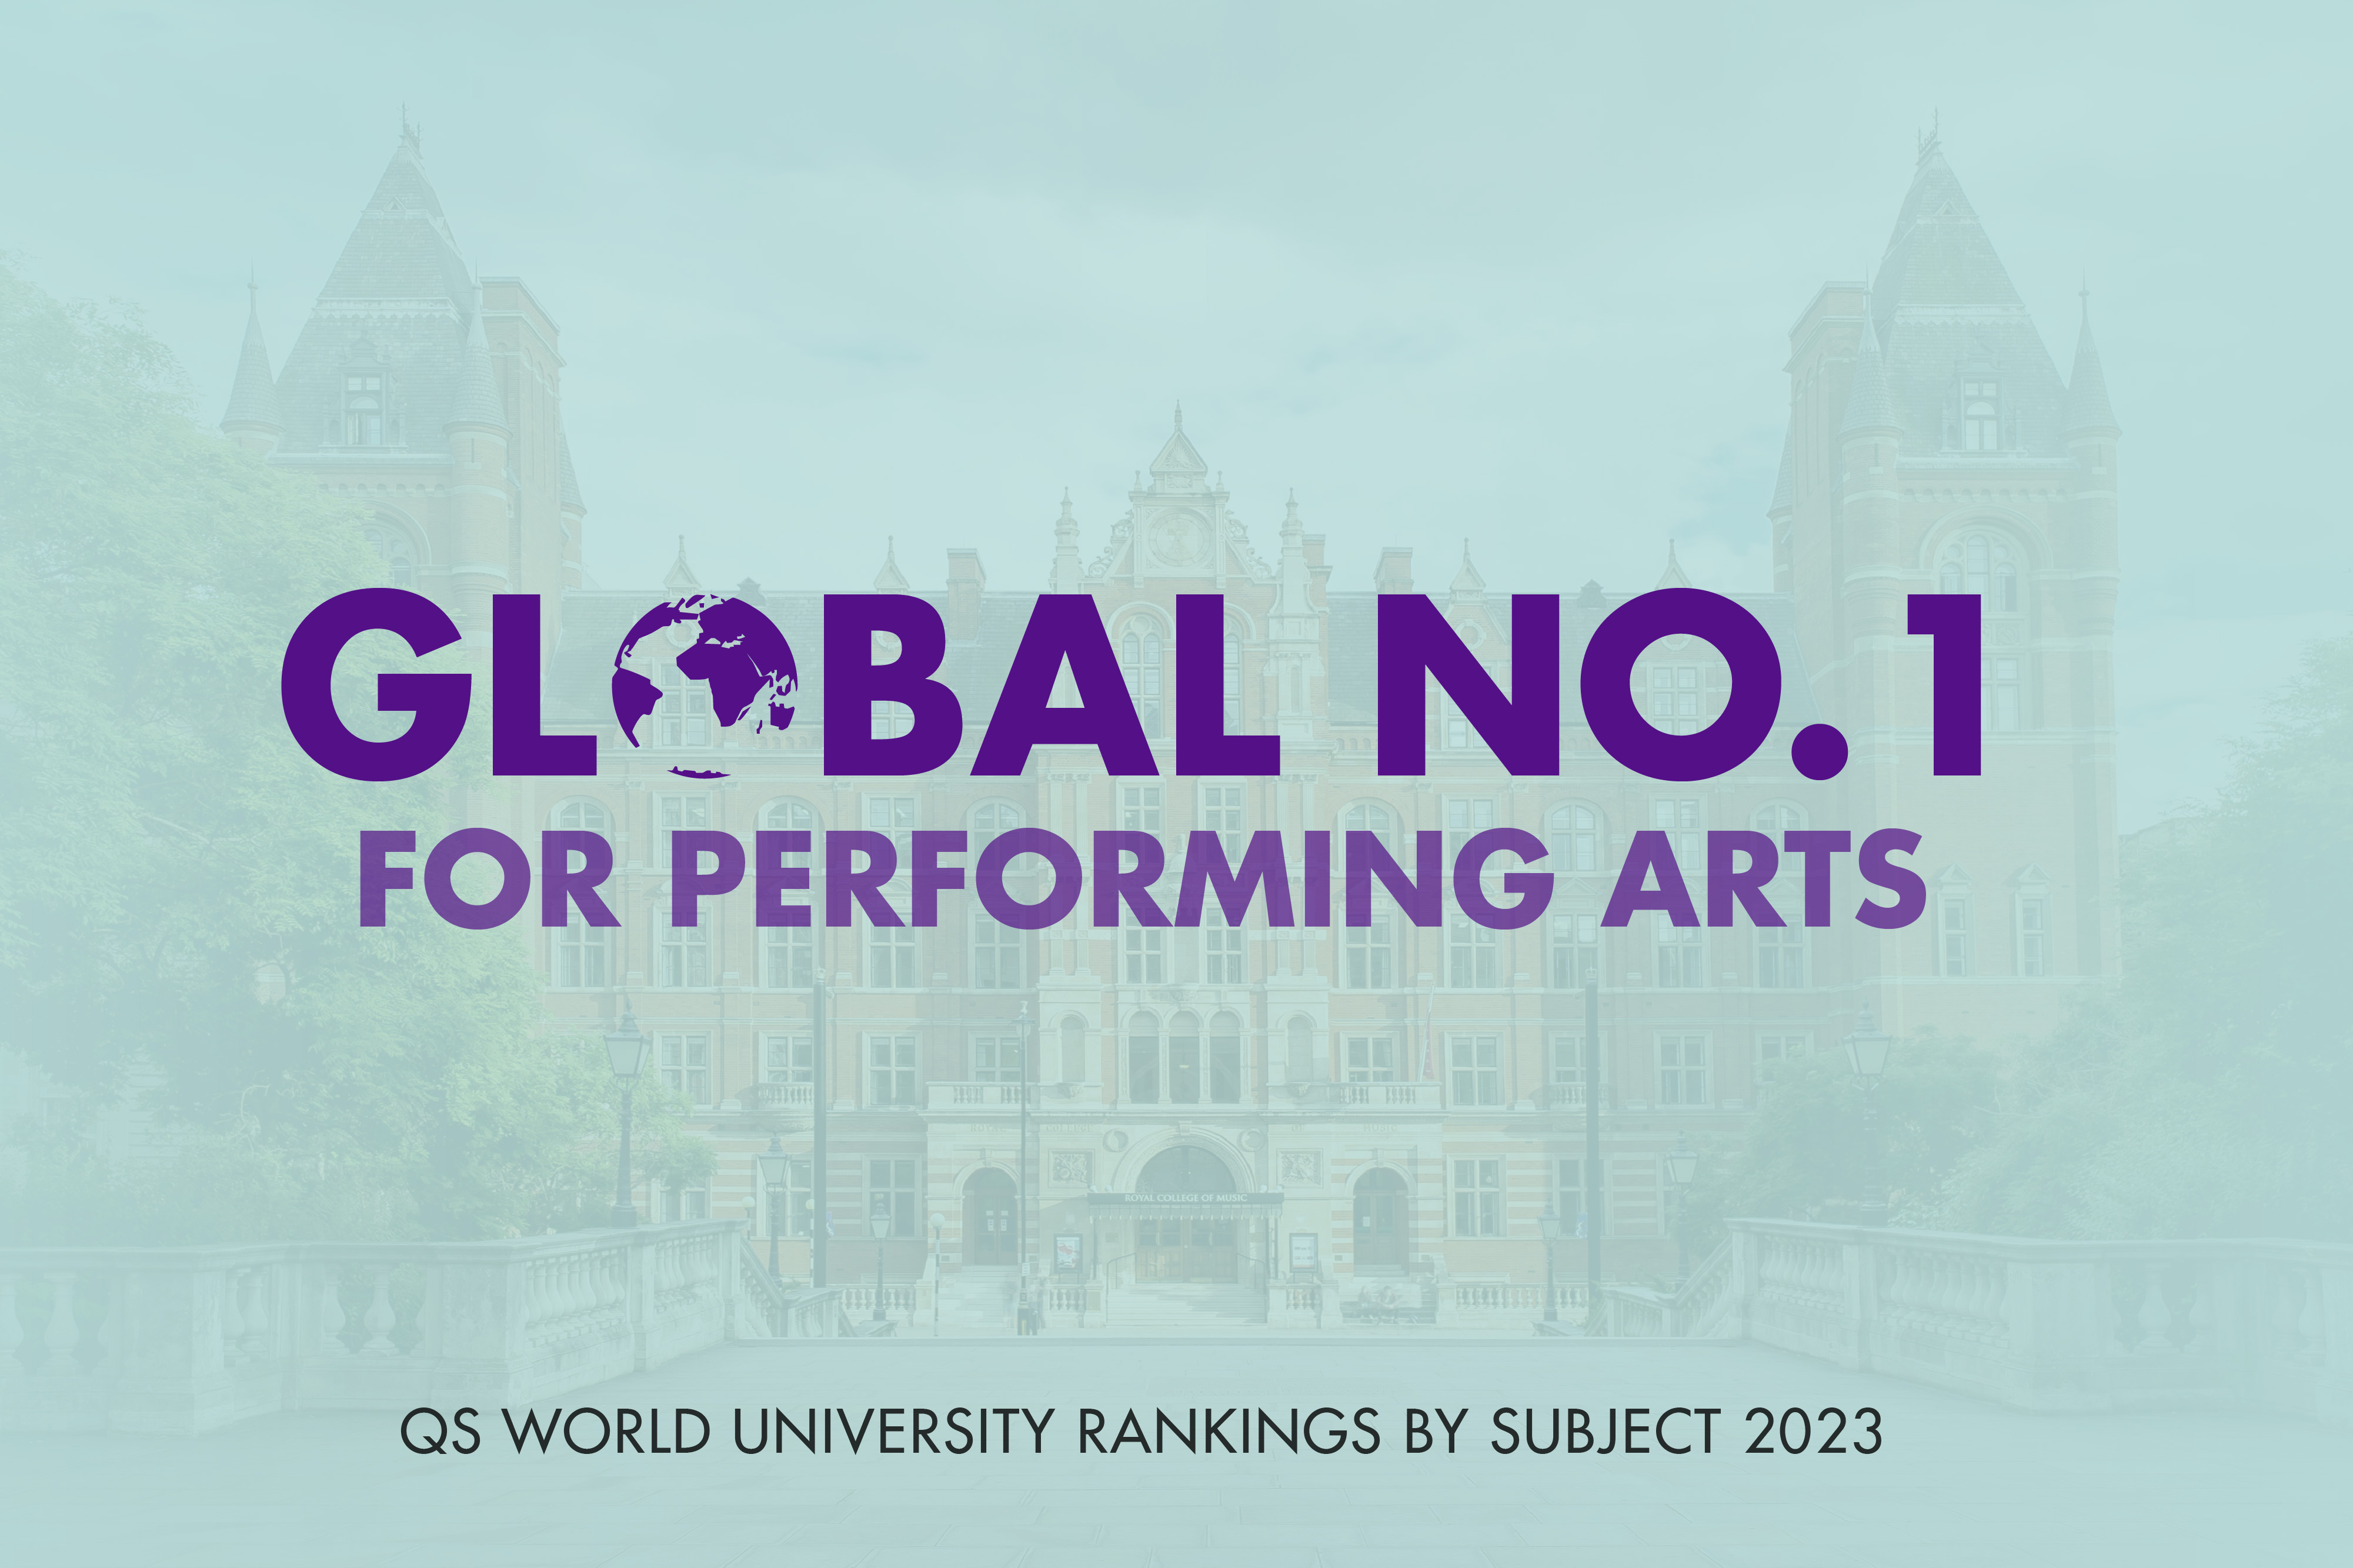 Royal College of Music ranked global No. 1 for performing arts 2023